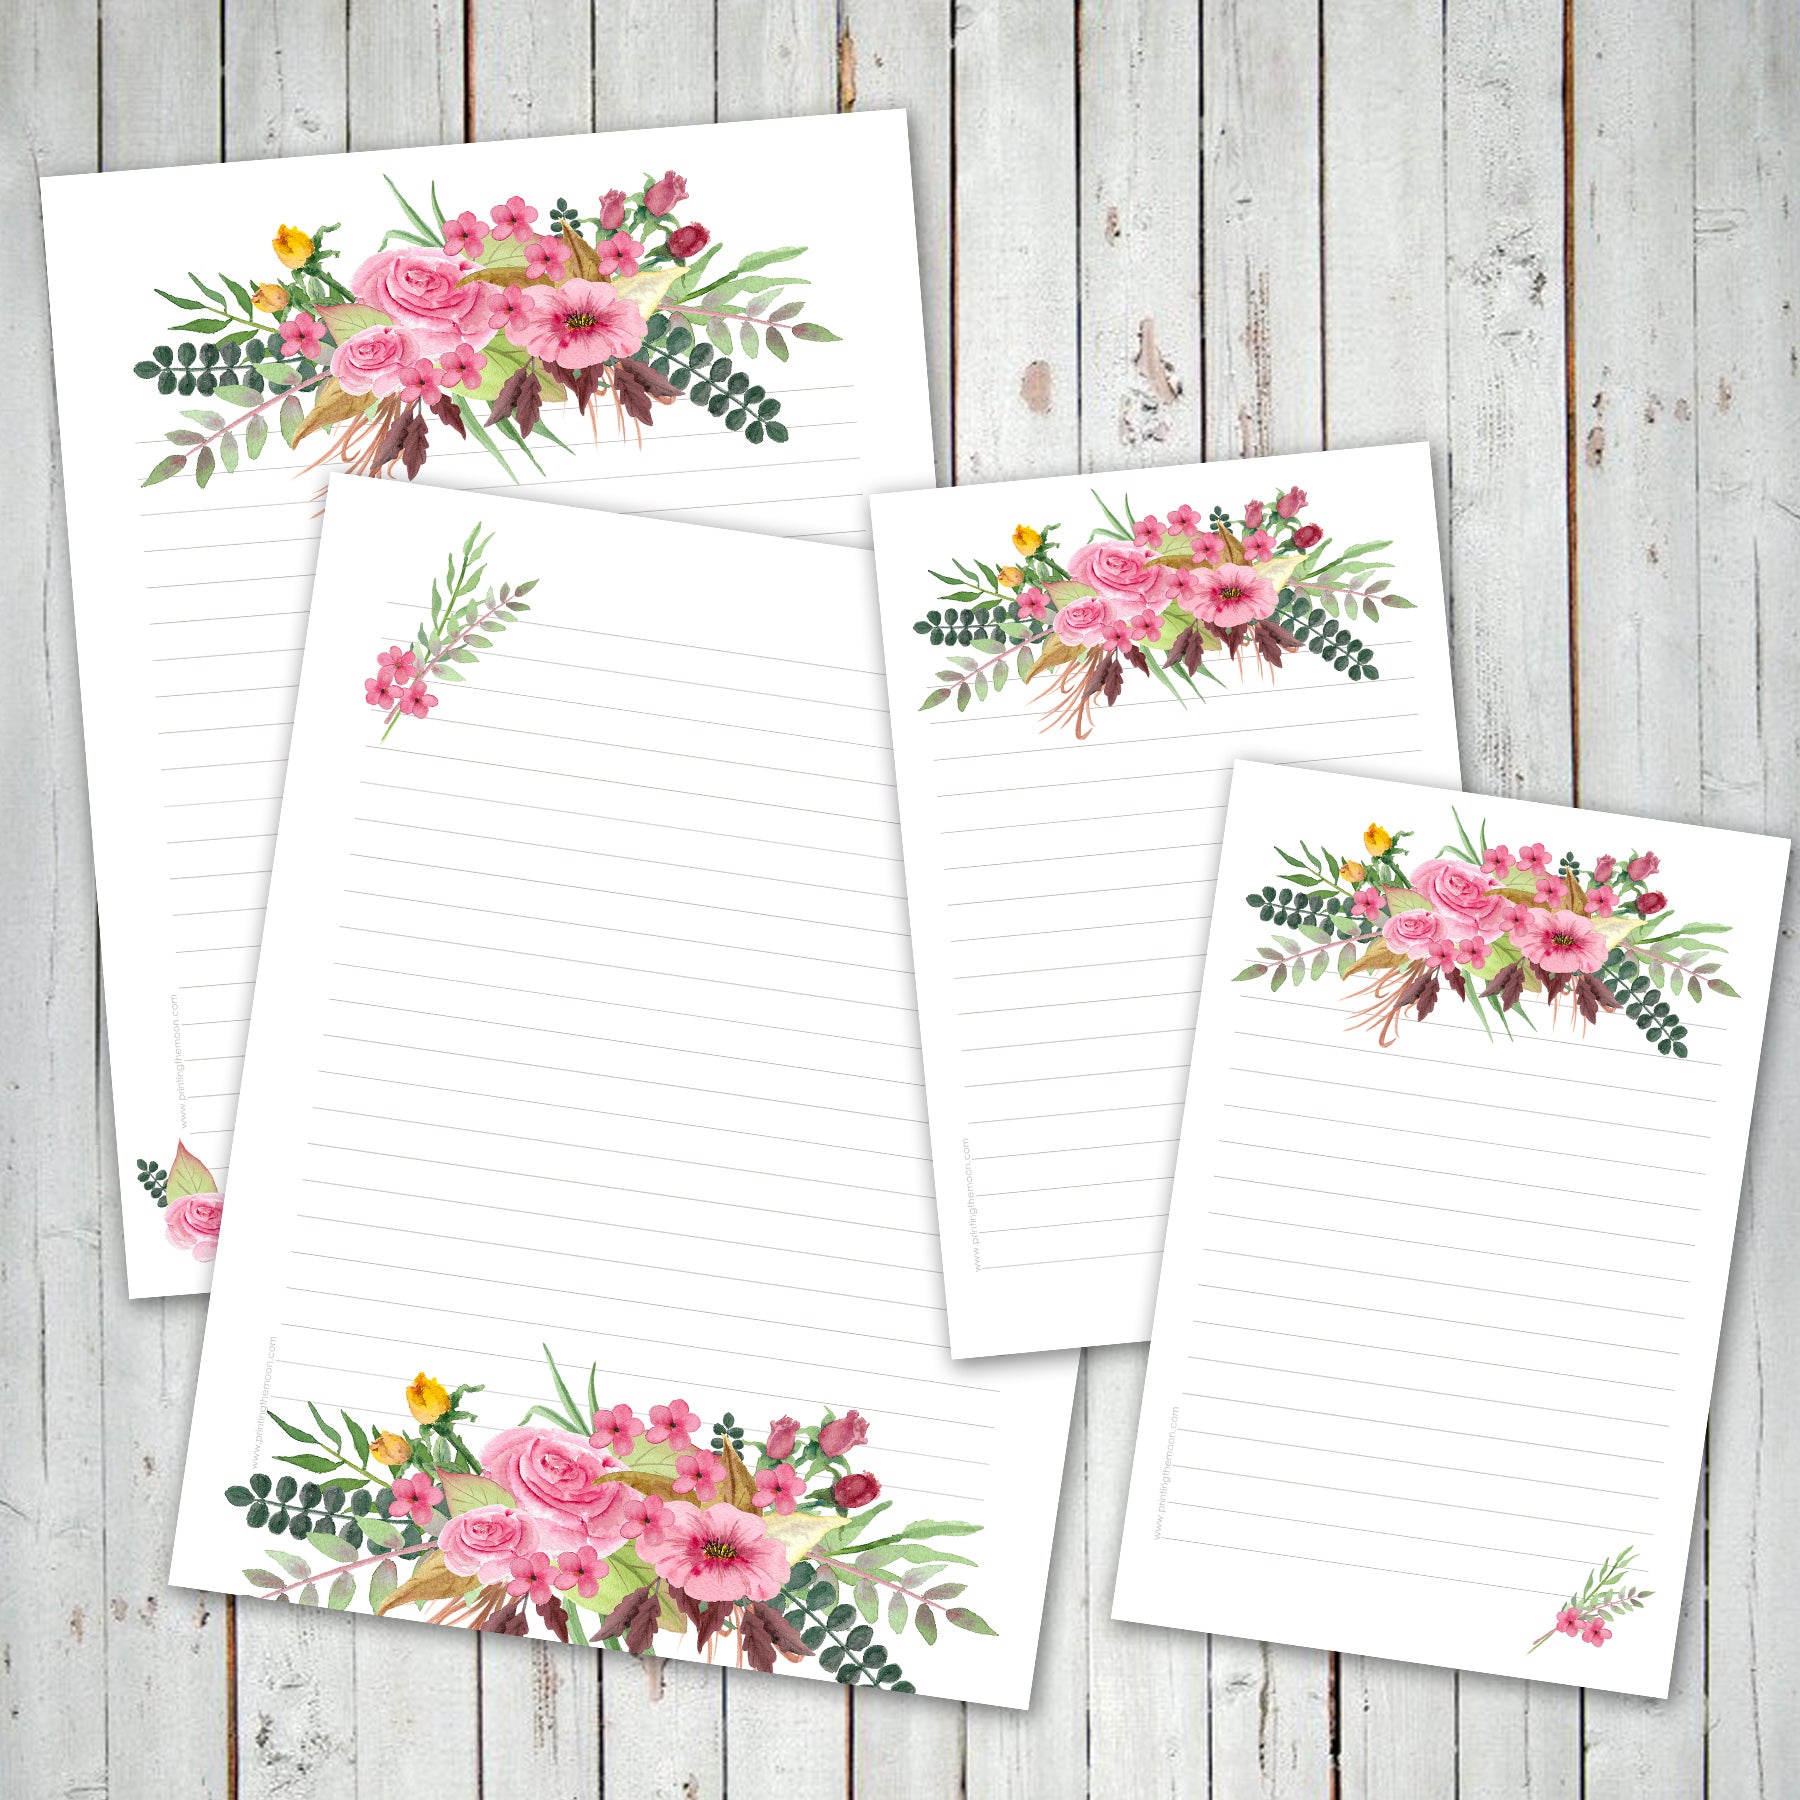 PRINTABLE LETTER WRITING SHEETS - Pink Flower Bouquet - Personal